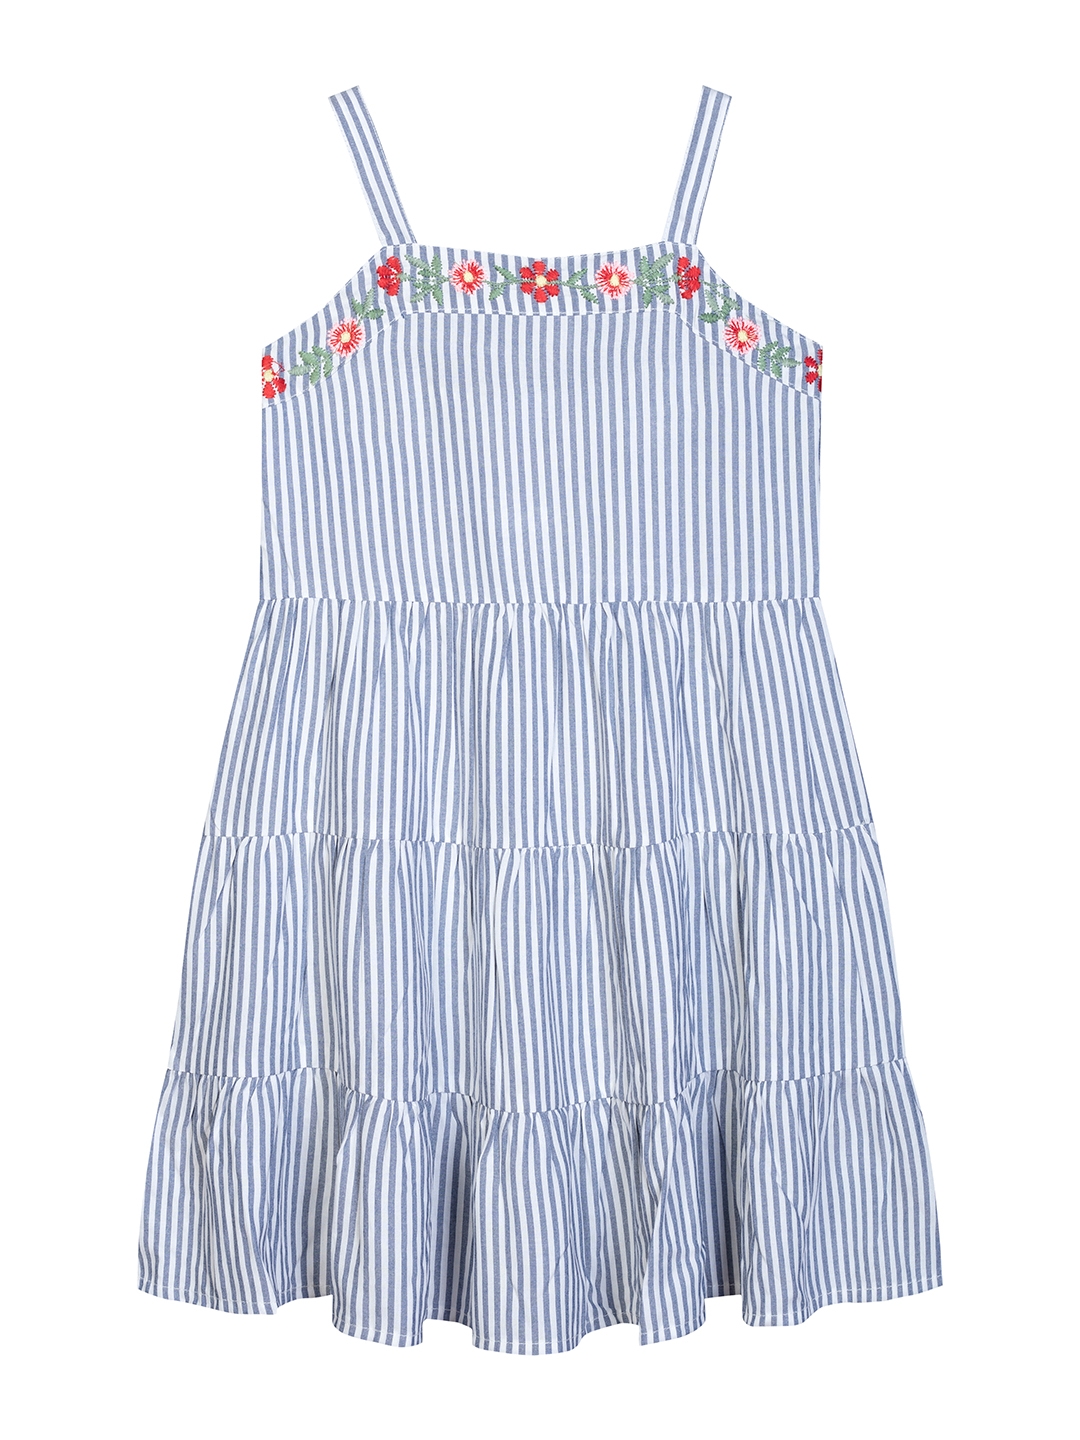 Budding Bees | Budding Bees Girls Blue Striped Embroidered A-Line Dress 0